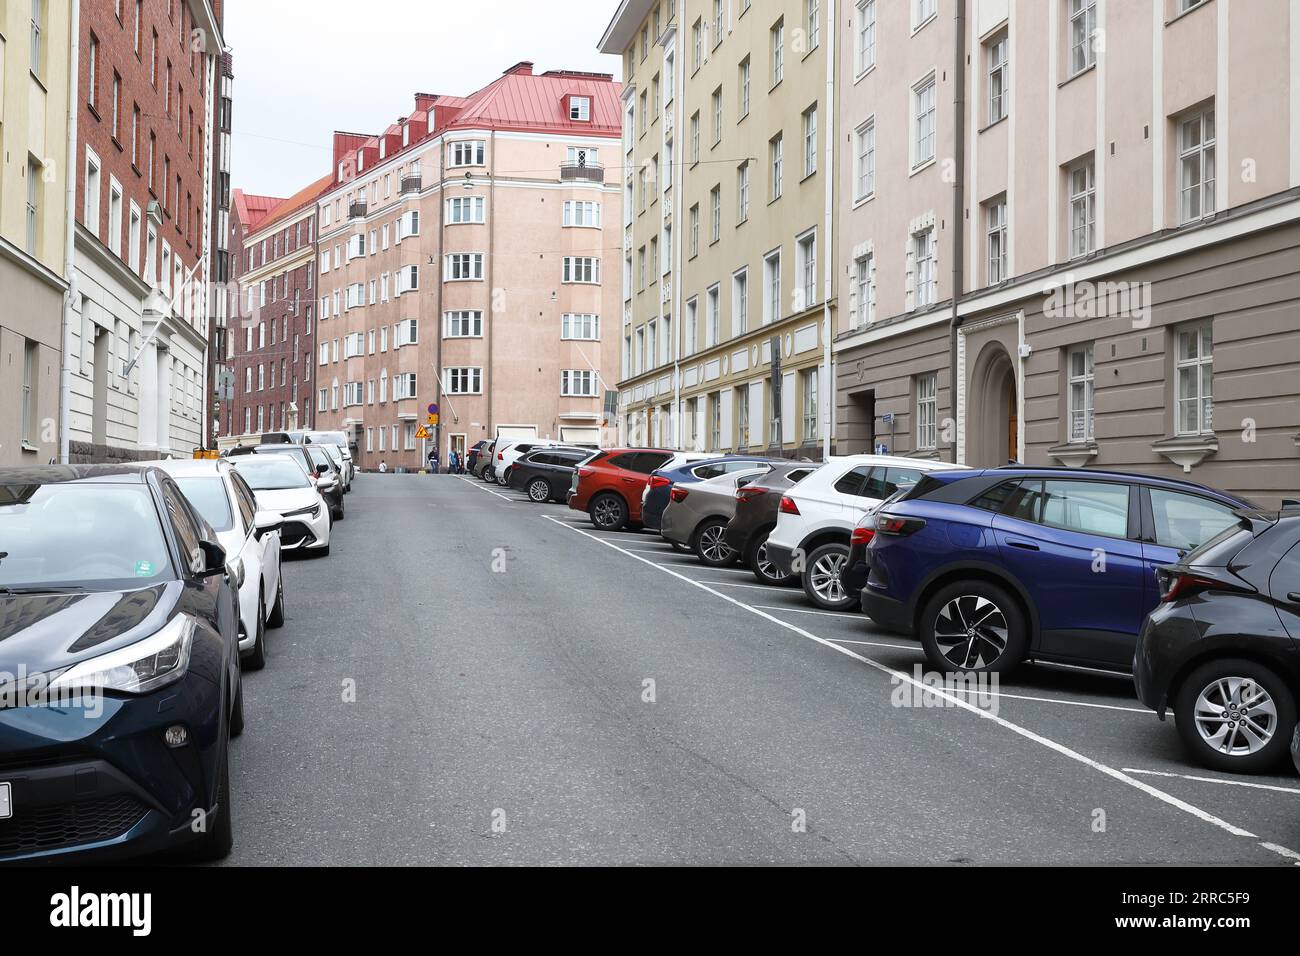 Helsinki, Finland - September 5, Dagmarinkatu street view with parked cars in a residential area. Stock Photo